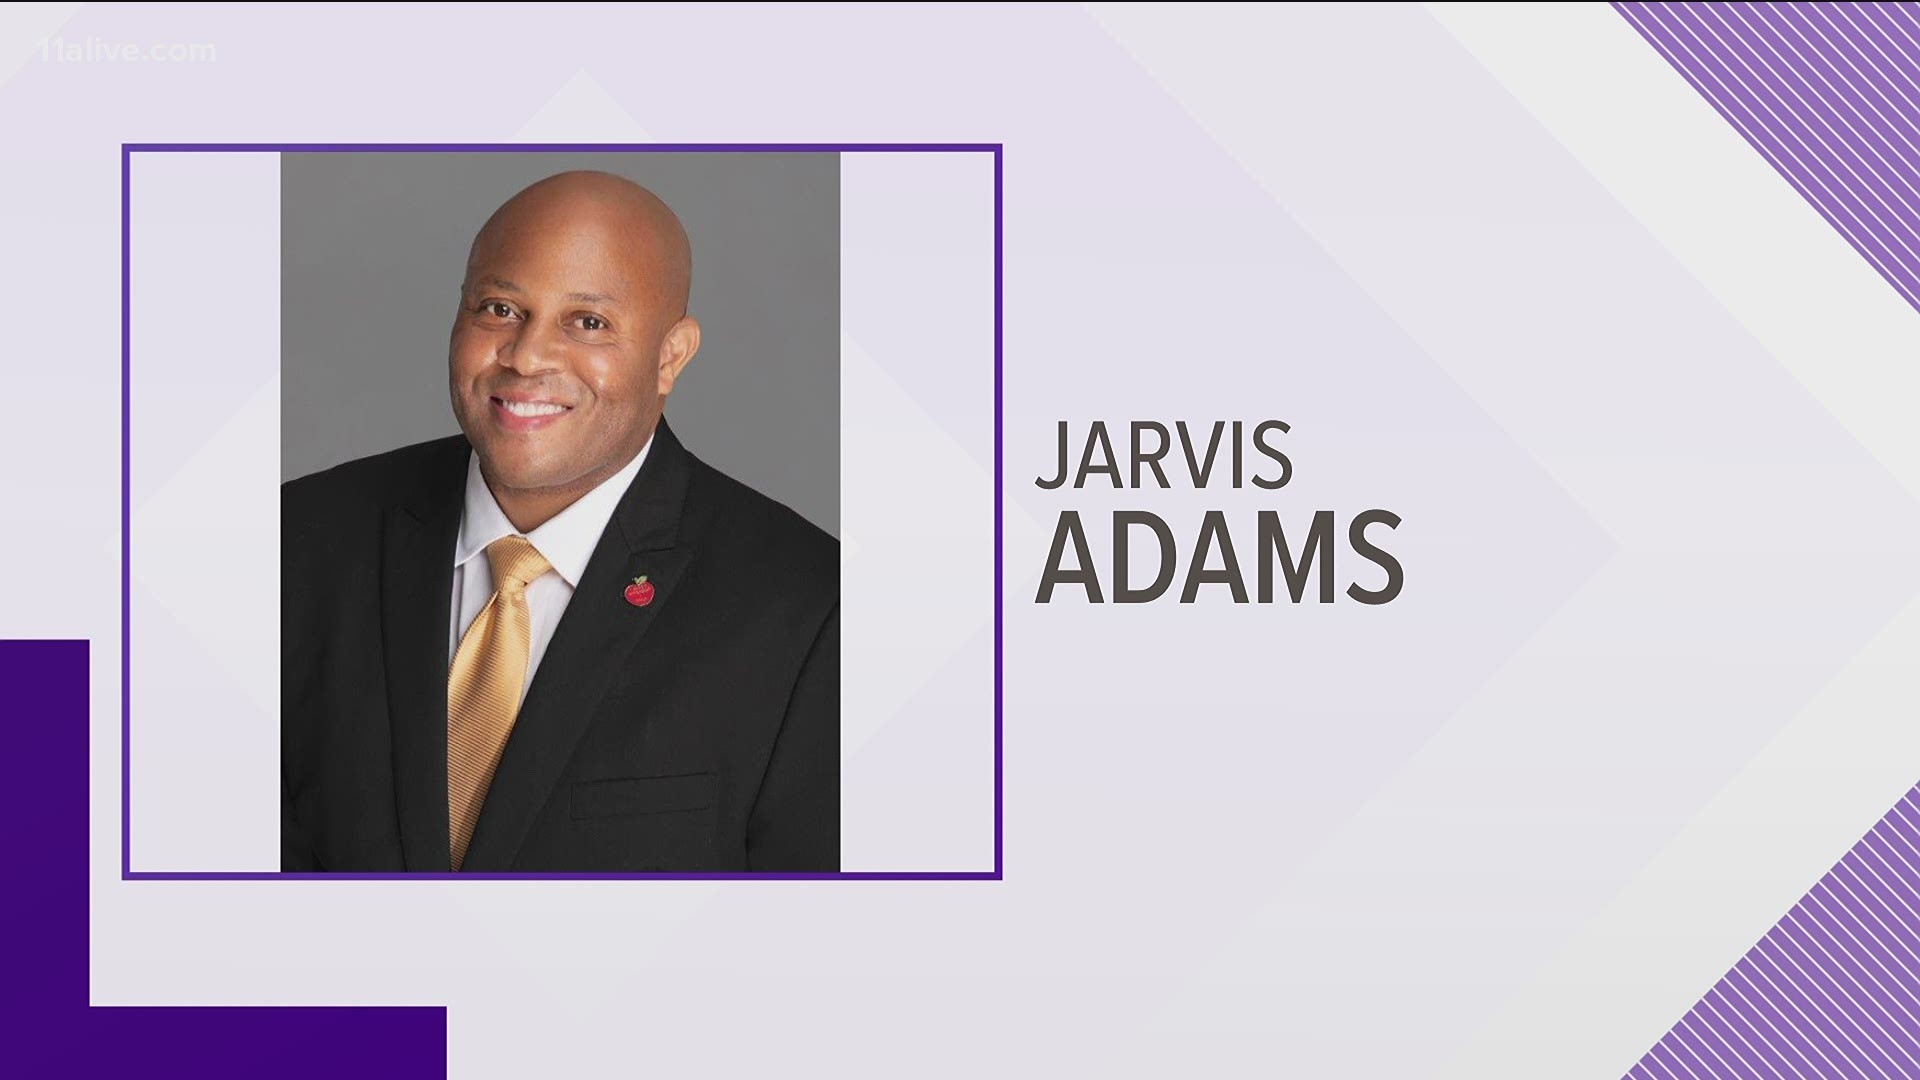 Jarvis Adams, an Augusta native, has been chosen to lead the school, according to Fulton County Schools.